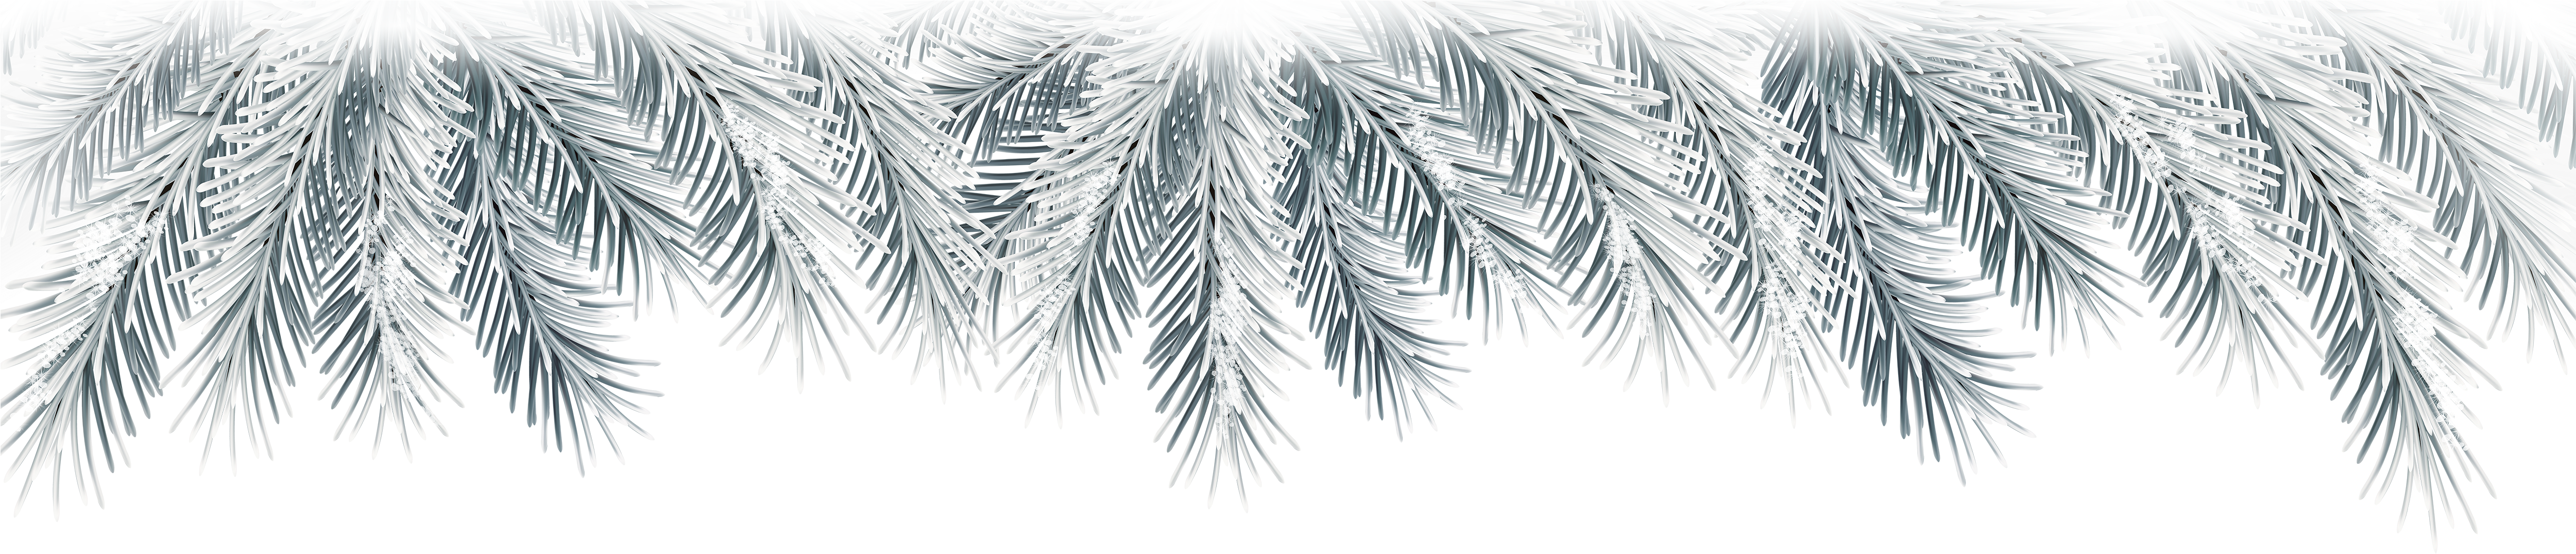 Branches Christmas Free Photo PNG Image